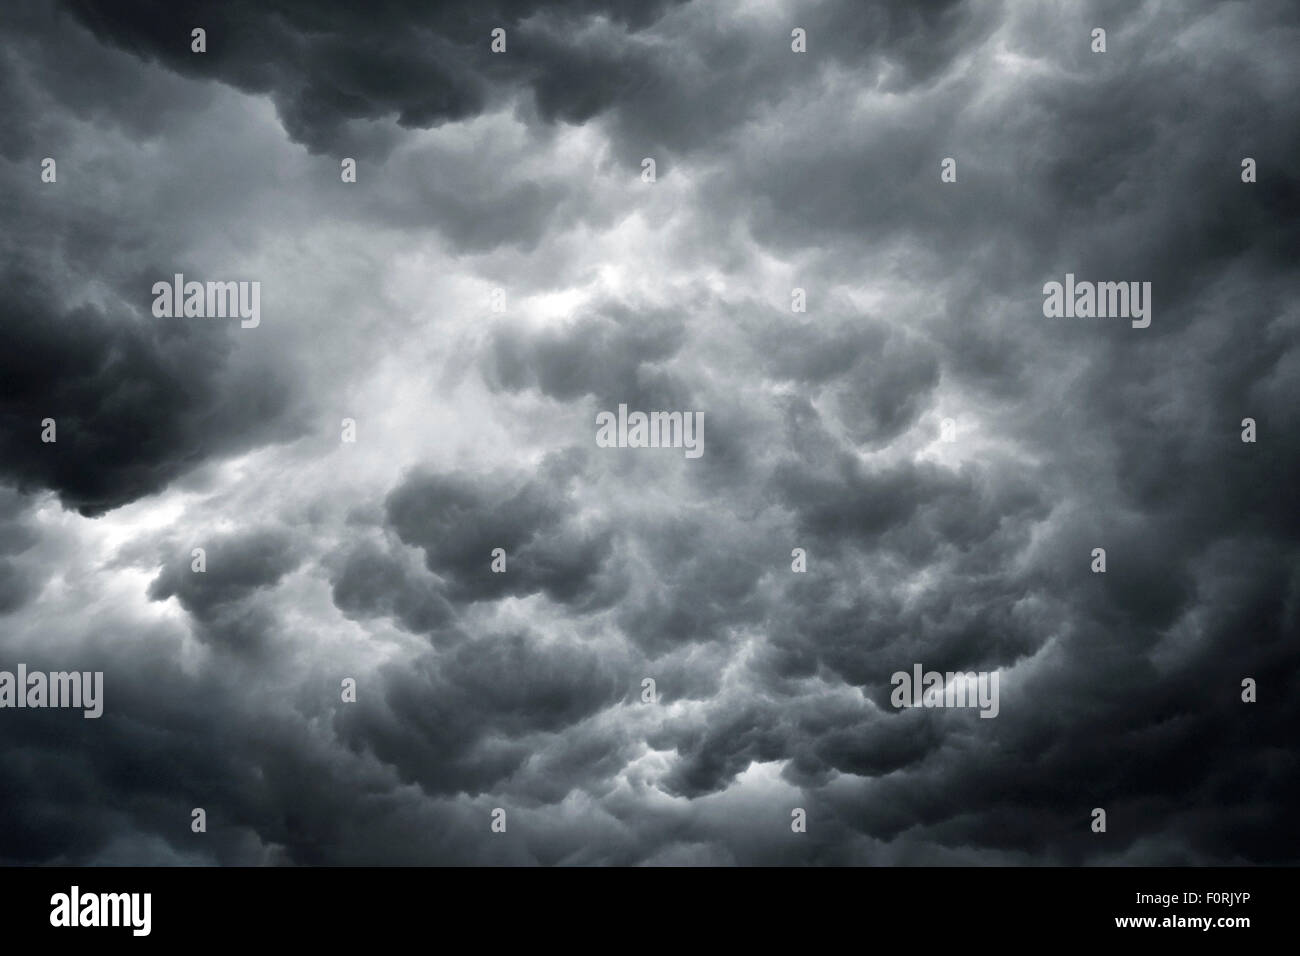 shot of dark and ominous storm clouds showing bad weather ahead Stock Photo